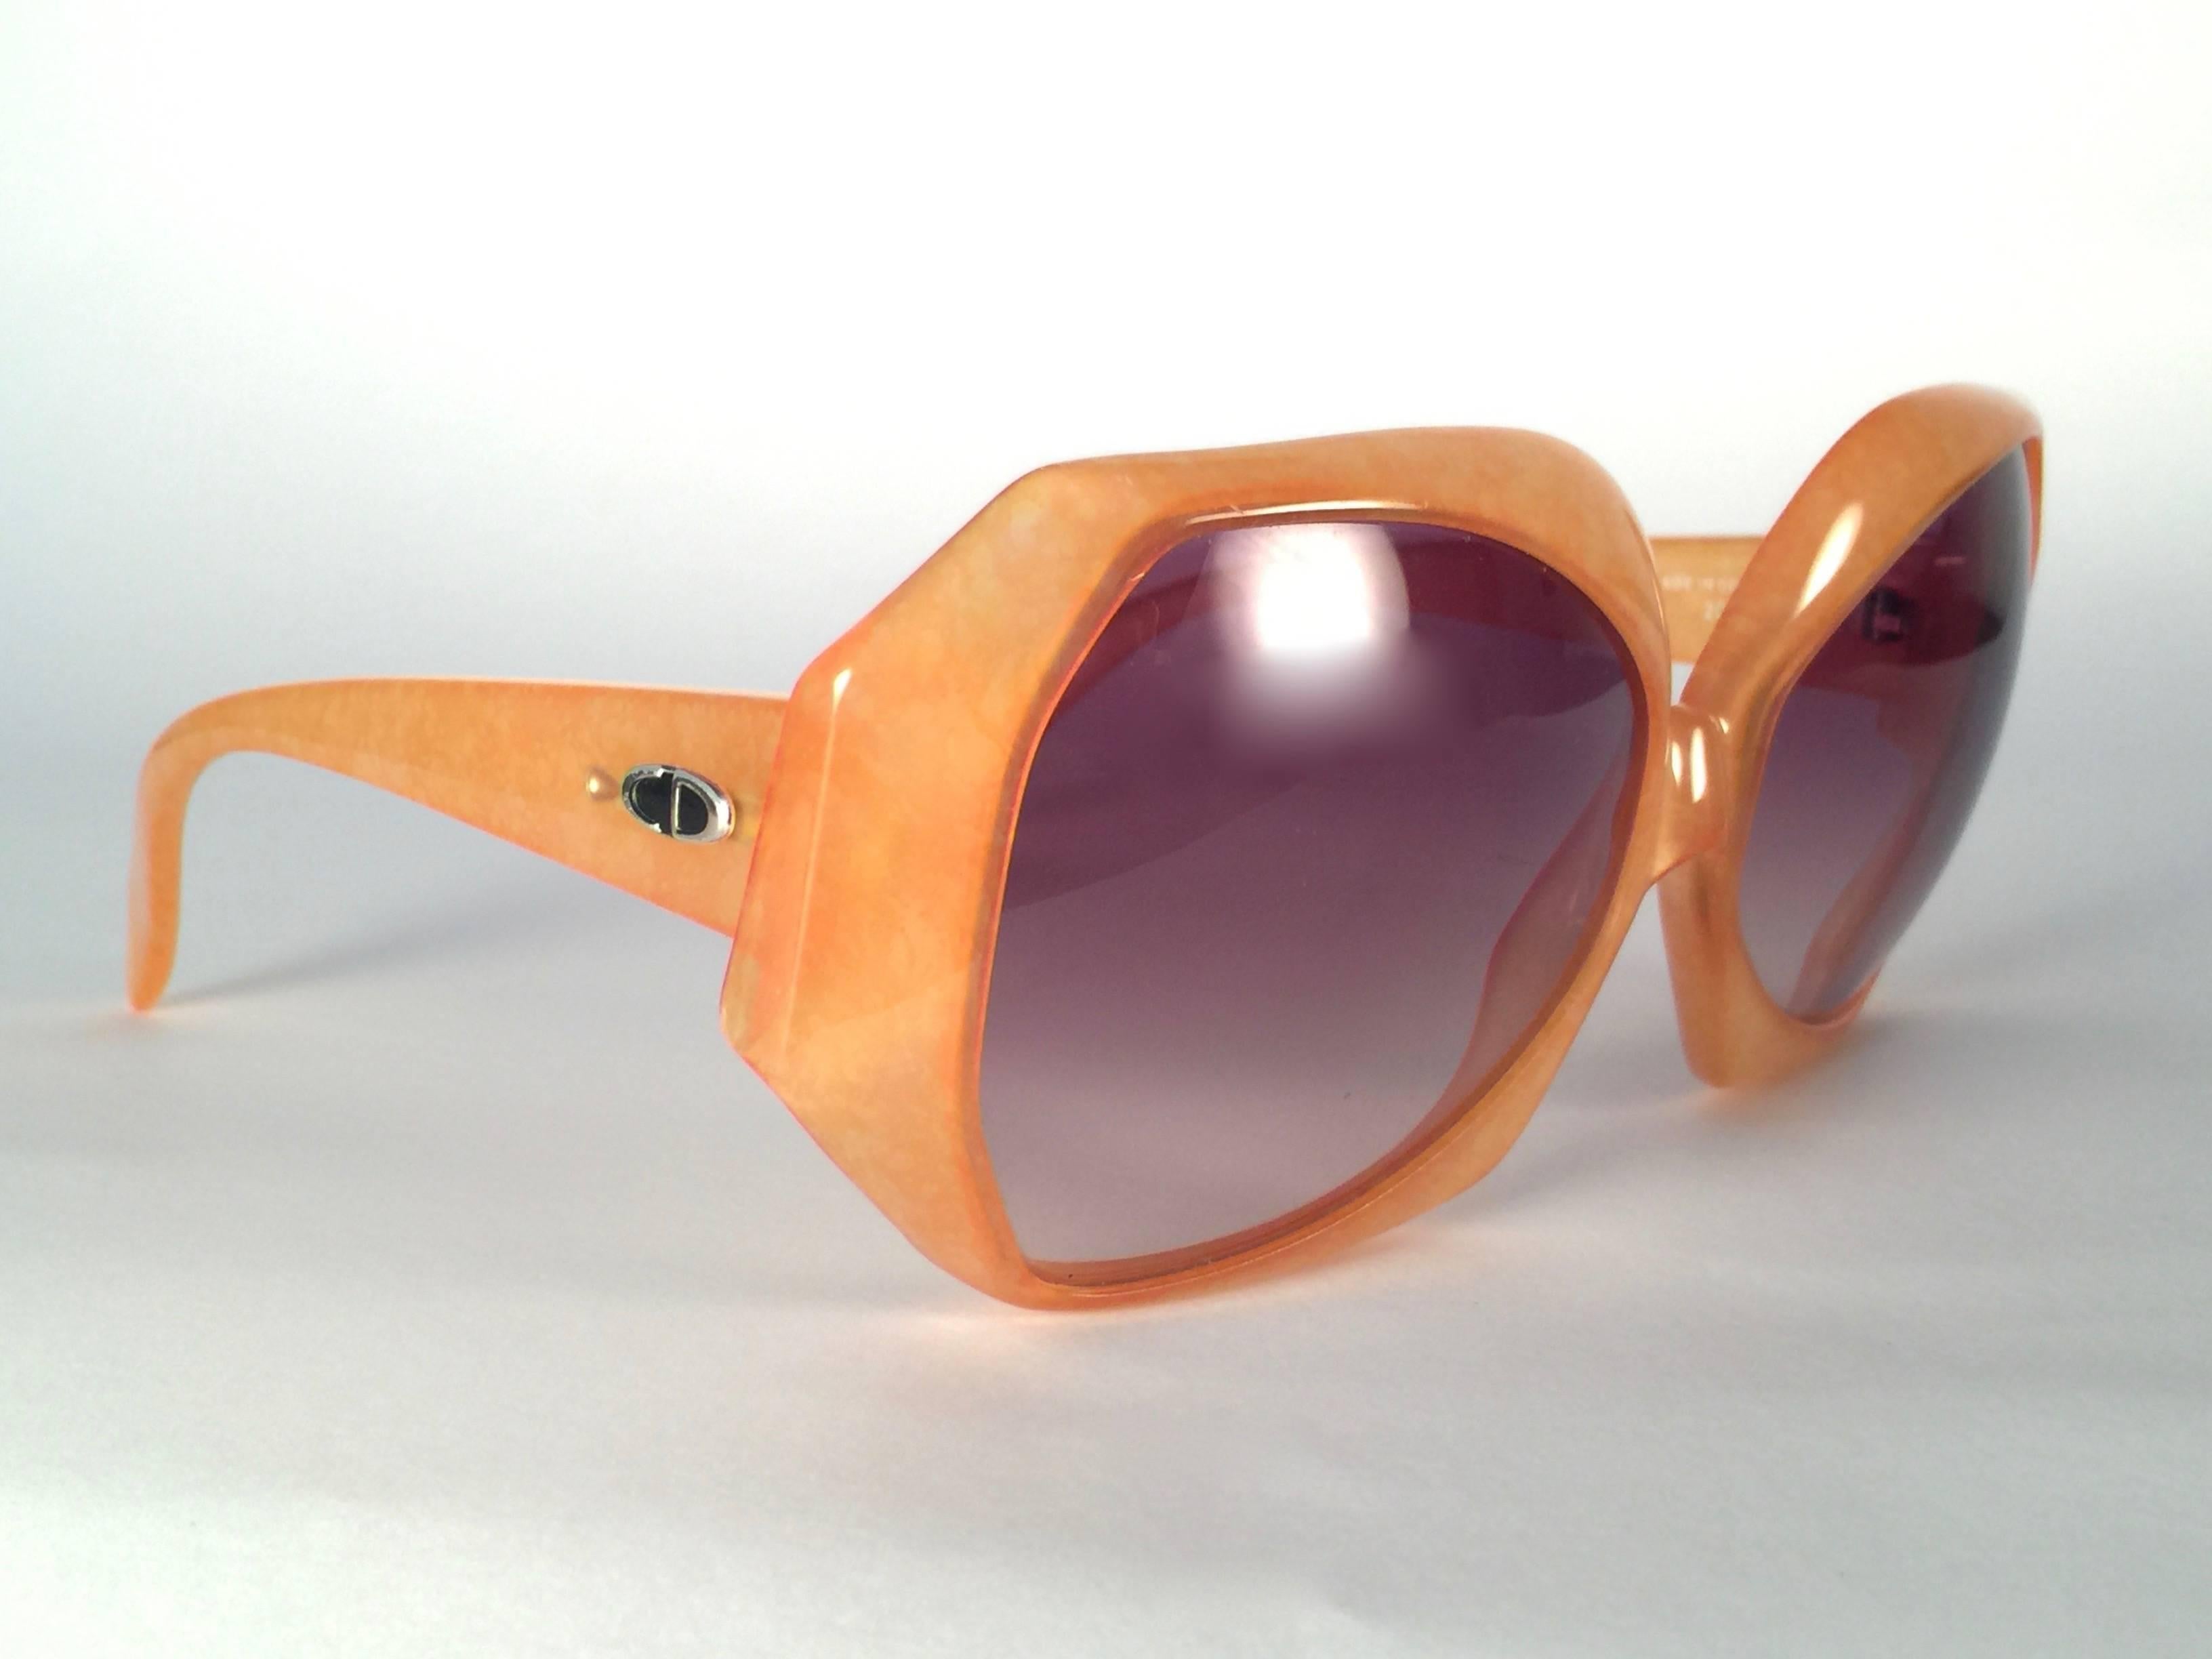 New Vintage Christian Dior 2025 30 Jasped Amber frame sporting light brown gradient lenses.   
Made in Germany.  
Produced and design in 1970's. 
 A collector’s piece!  
New, never worn or displayed. Comes with its original silver Christian Dior